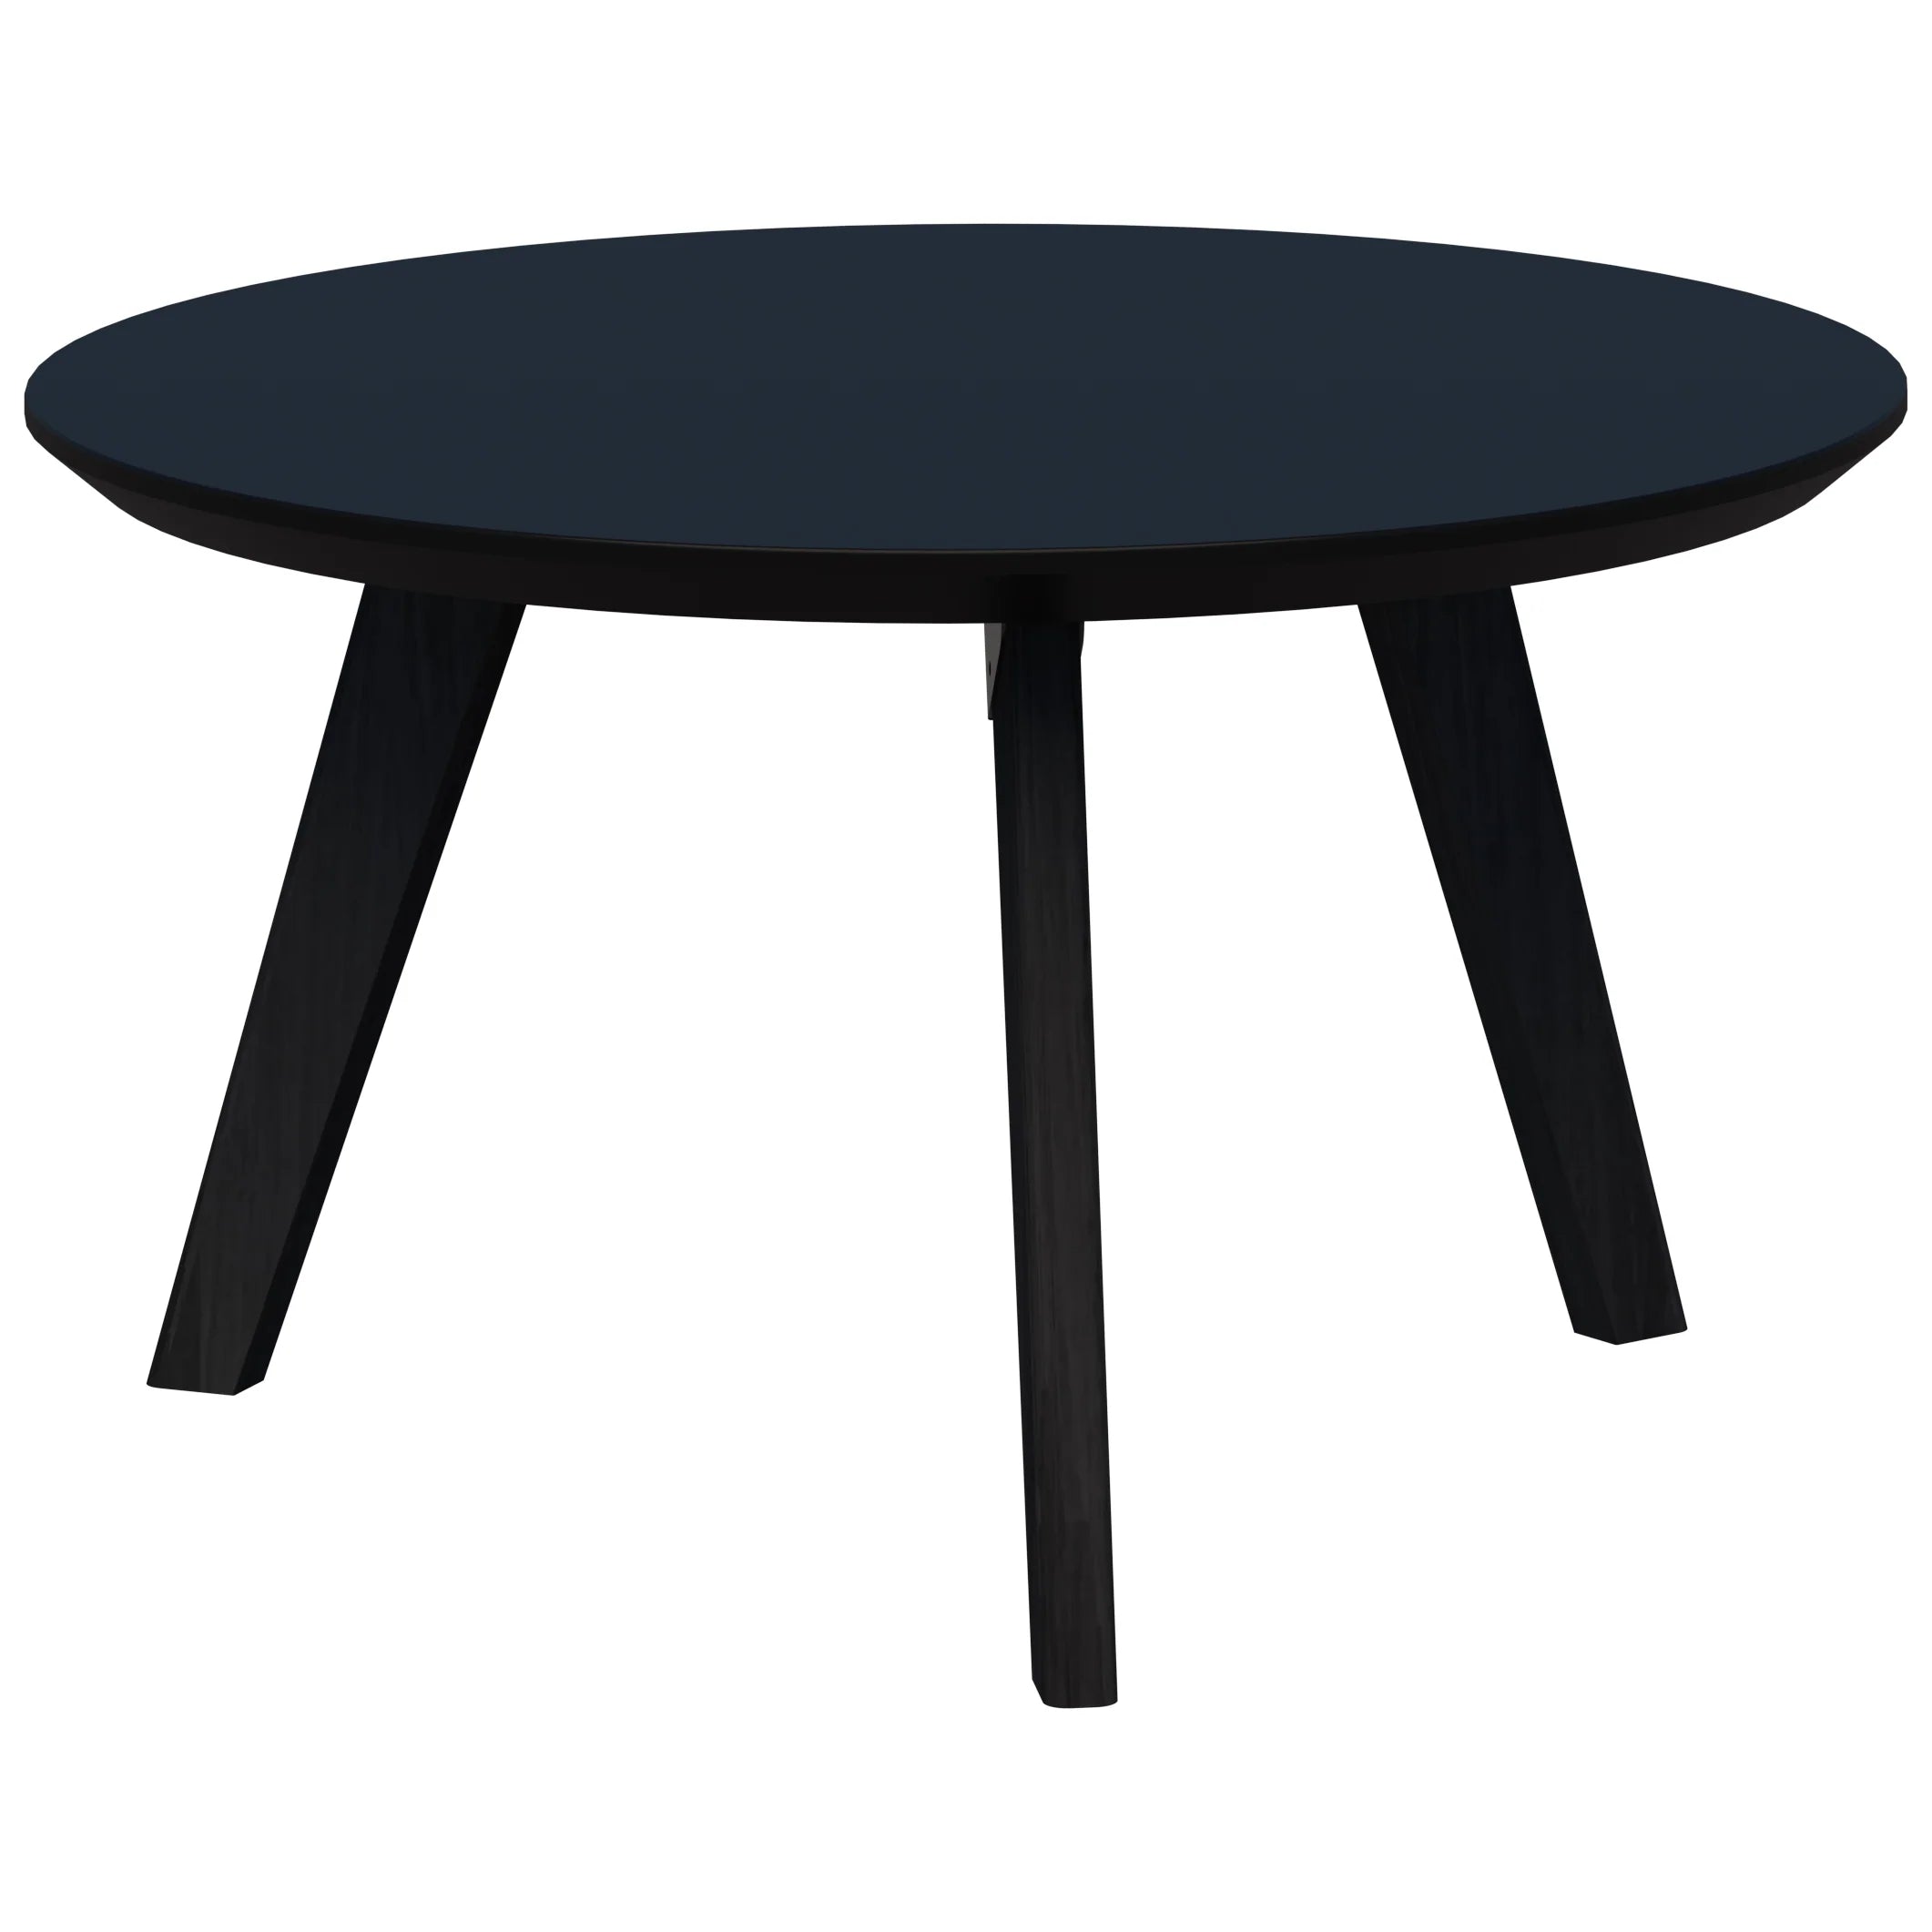 Oslo round coffee table with black stained ash timber frame and black velvet soft matt top.